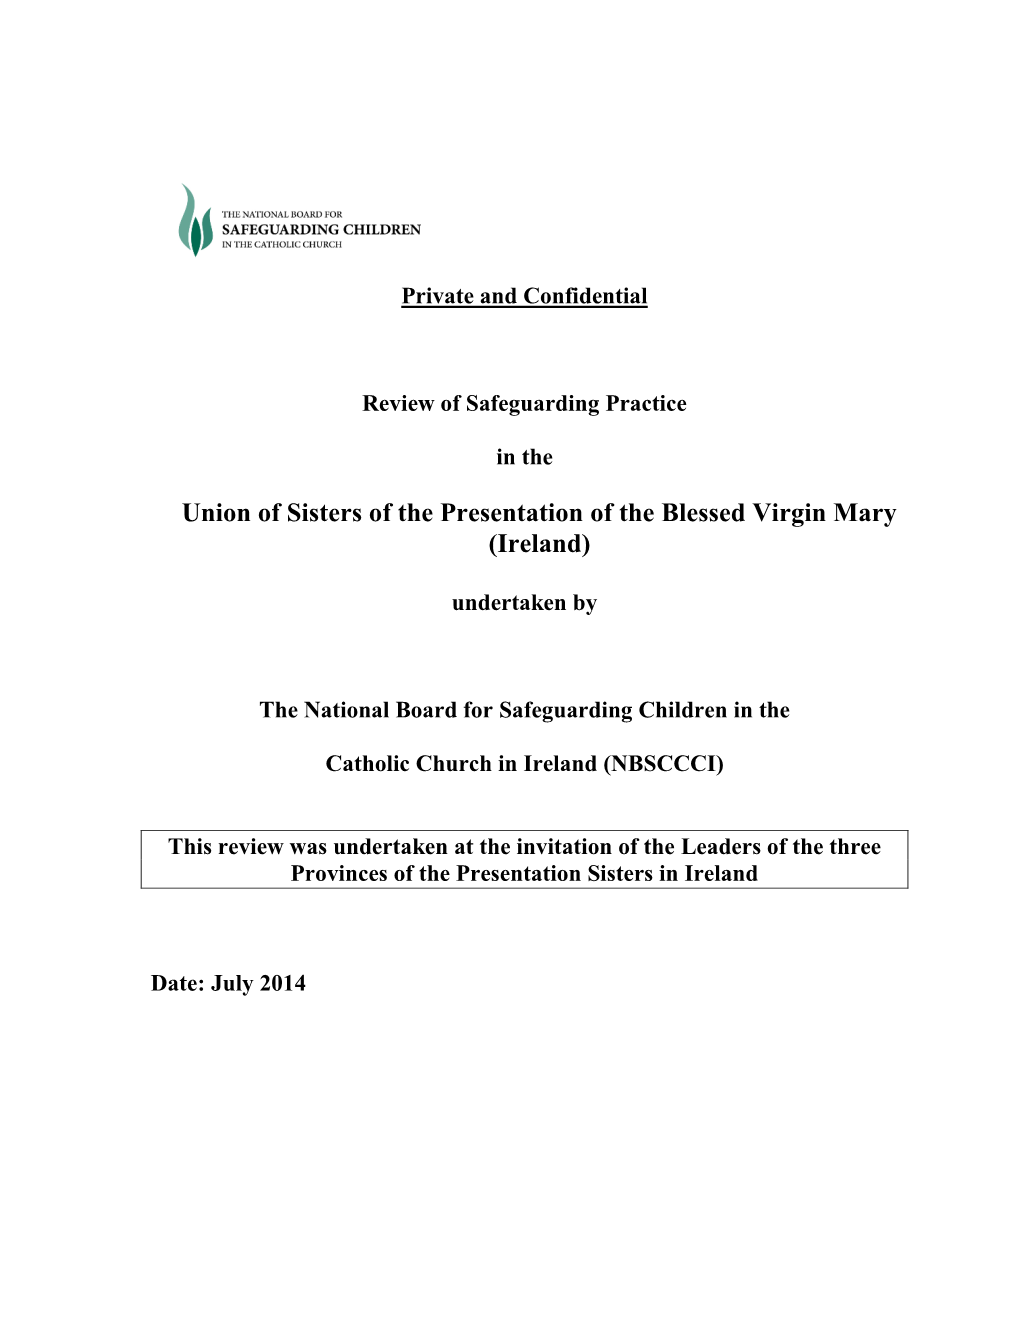 Union of Sisters of the Presentation of the Blessed Virgin Mary (Ireland)